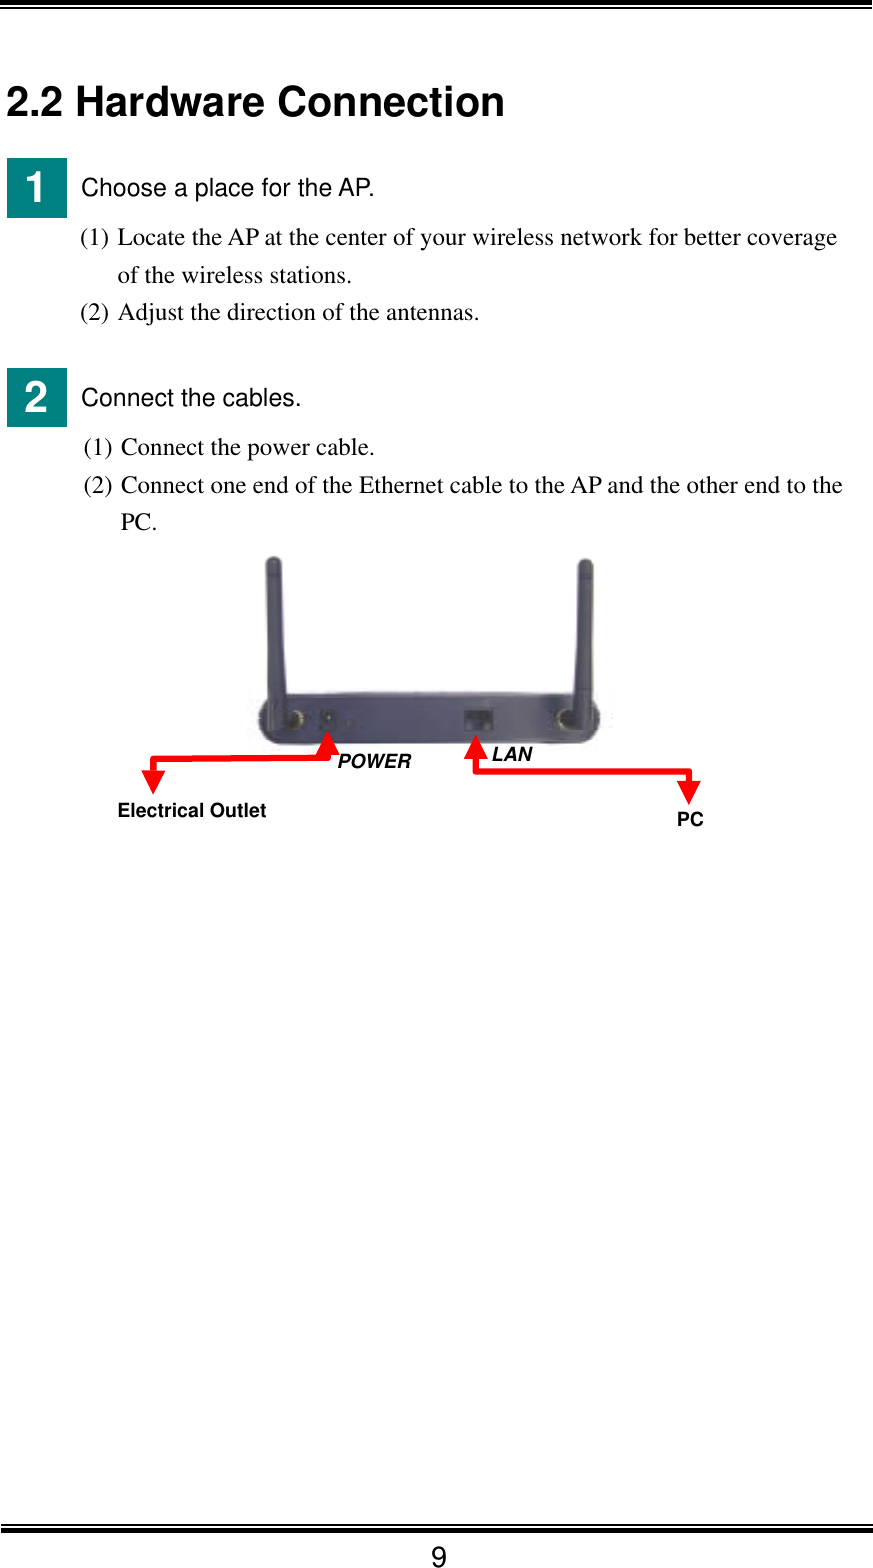  9 2.2 Hardware Connection  1   Choose a place for the AP. (1) Locate the AP at the center of your wireless network for better coverage of the wireless stations. (2) Adjust the direction of the antennas.   2   Connect the cables. (1) Connect the power cable. (2) Connect one end of the Ethernet cable to the AP and the other end to the PC.  LAN POWER Electrical Outlet  PC    